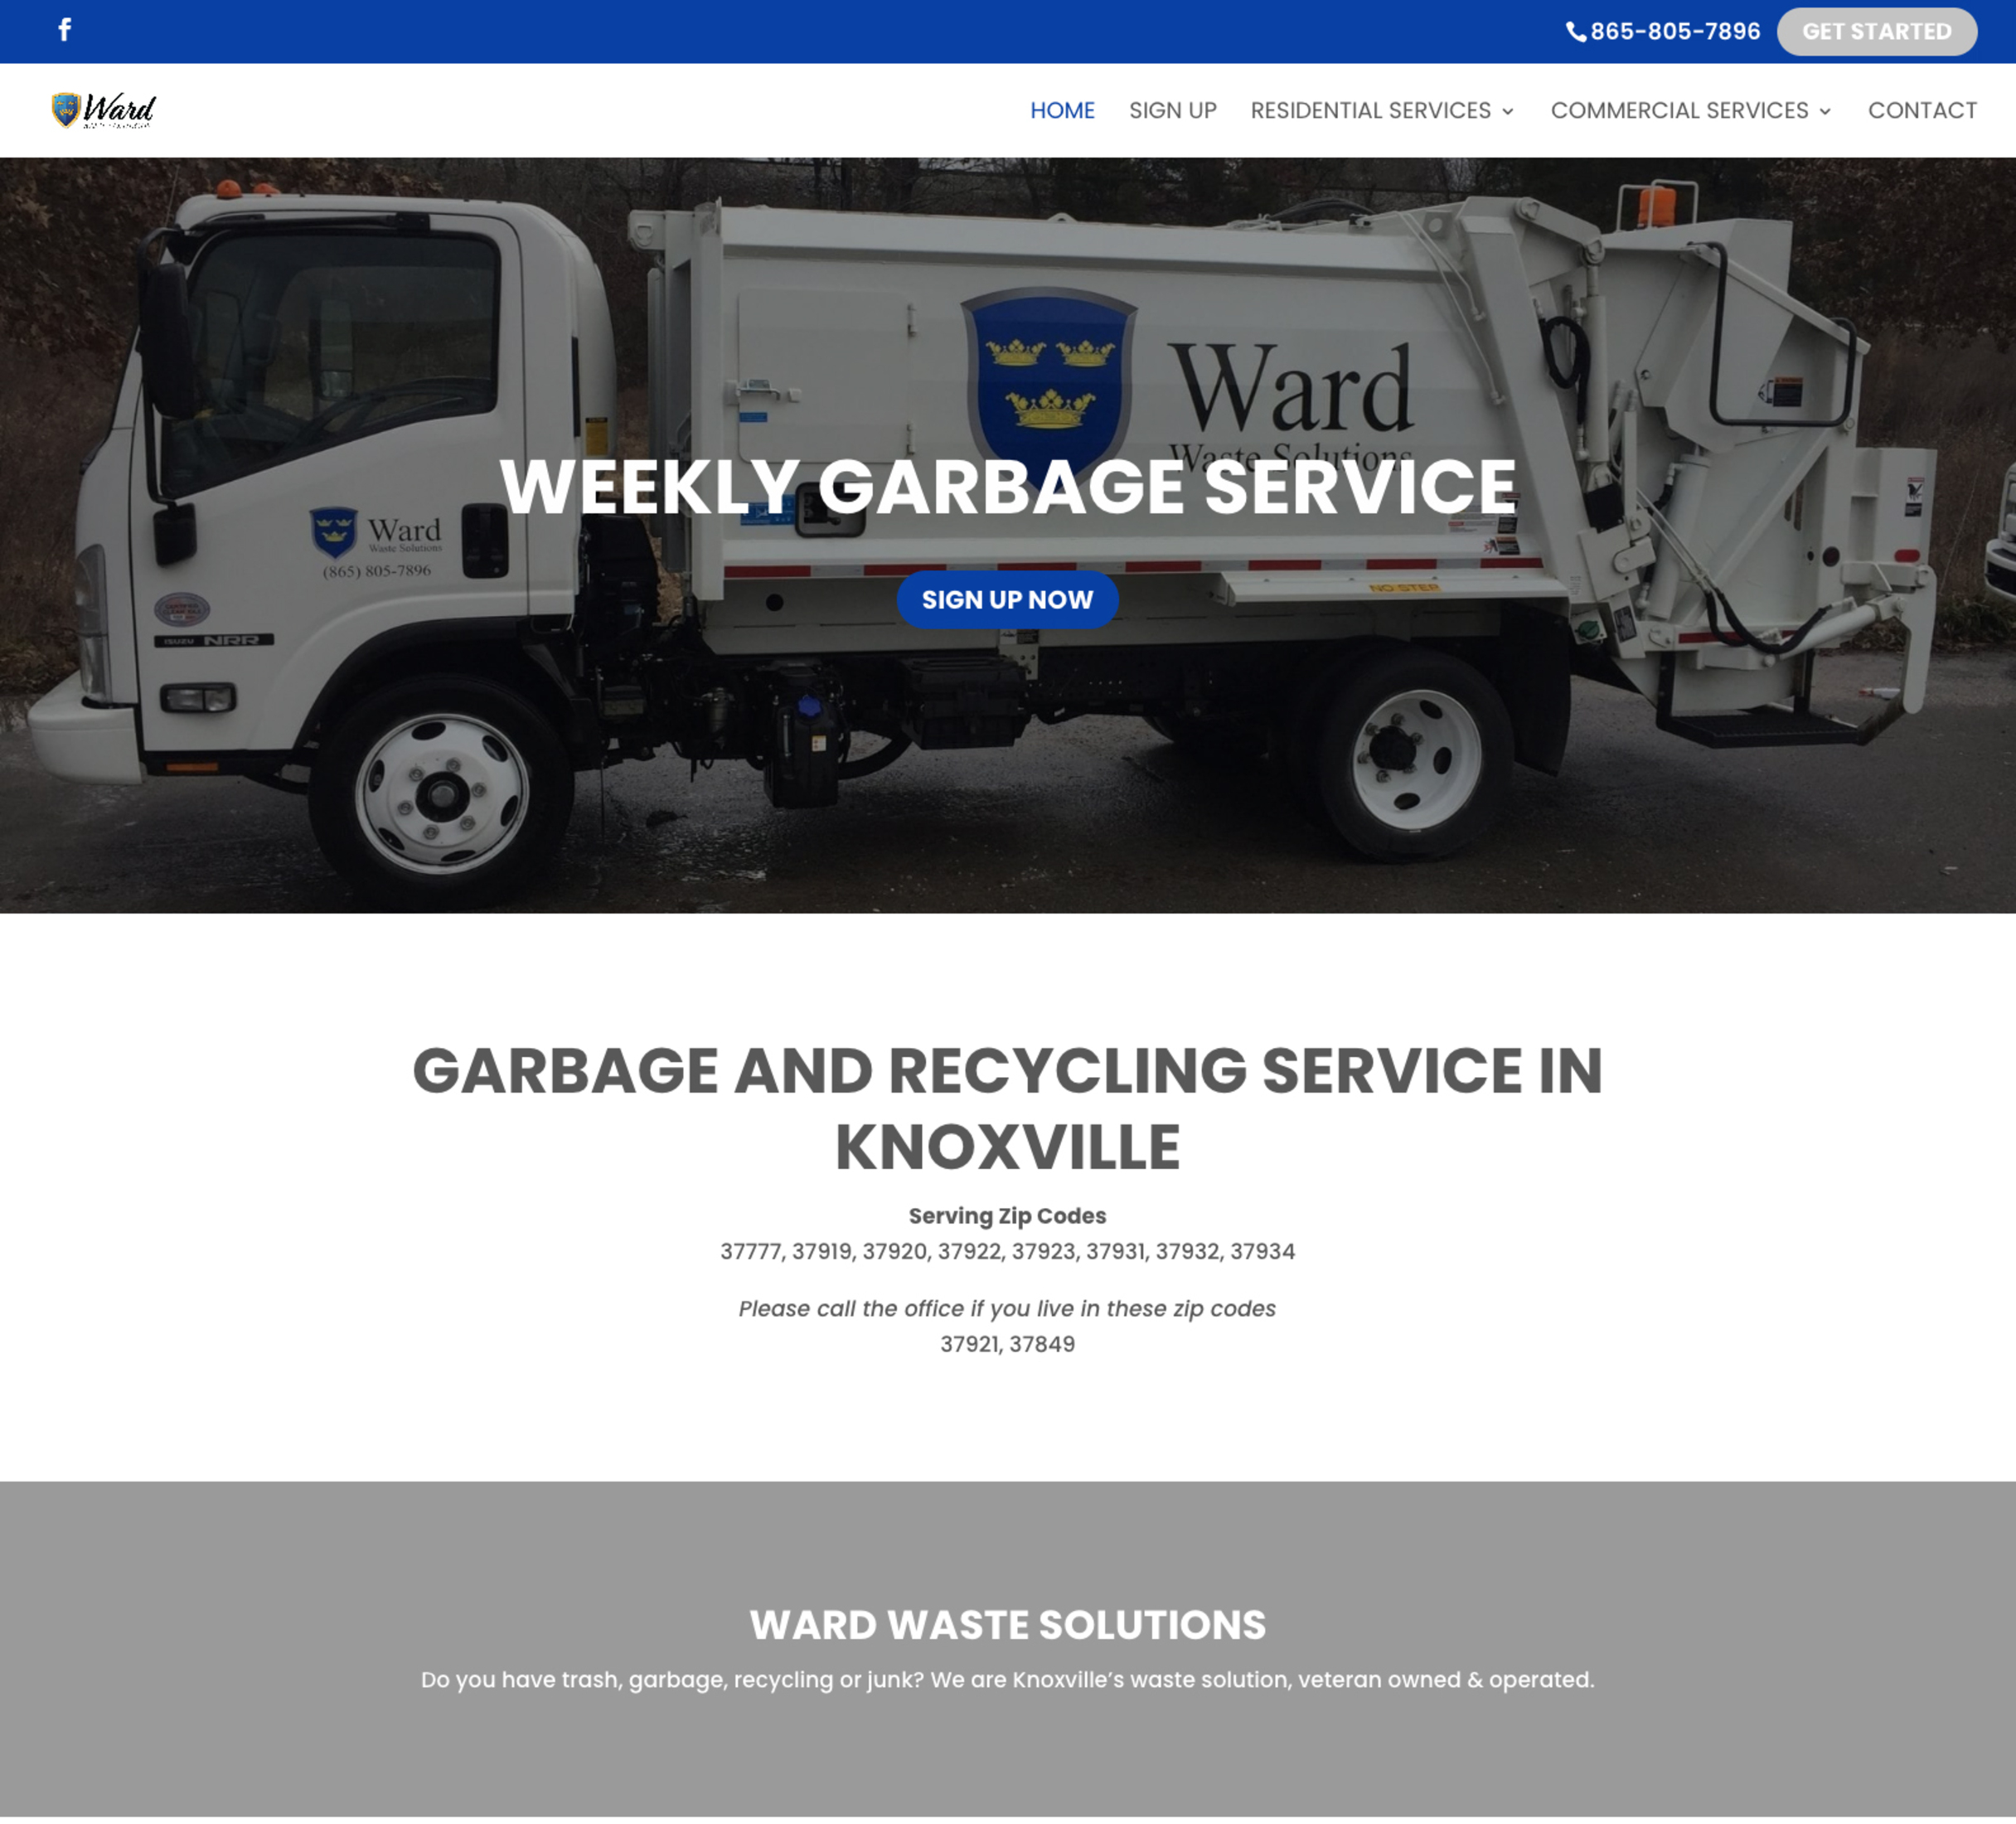 Ward Waste Solutions